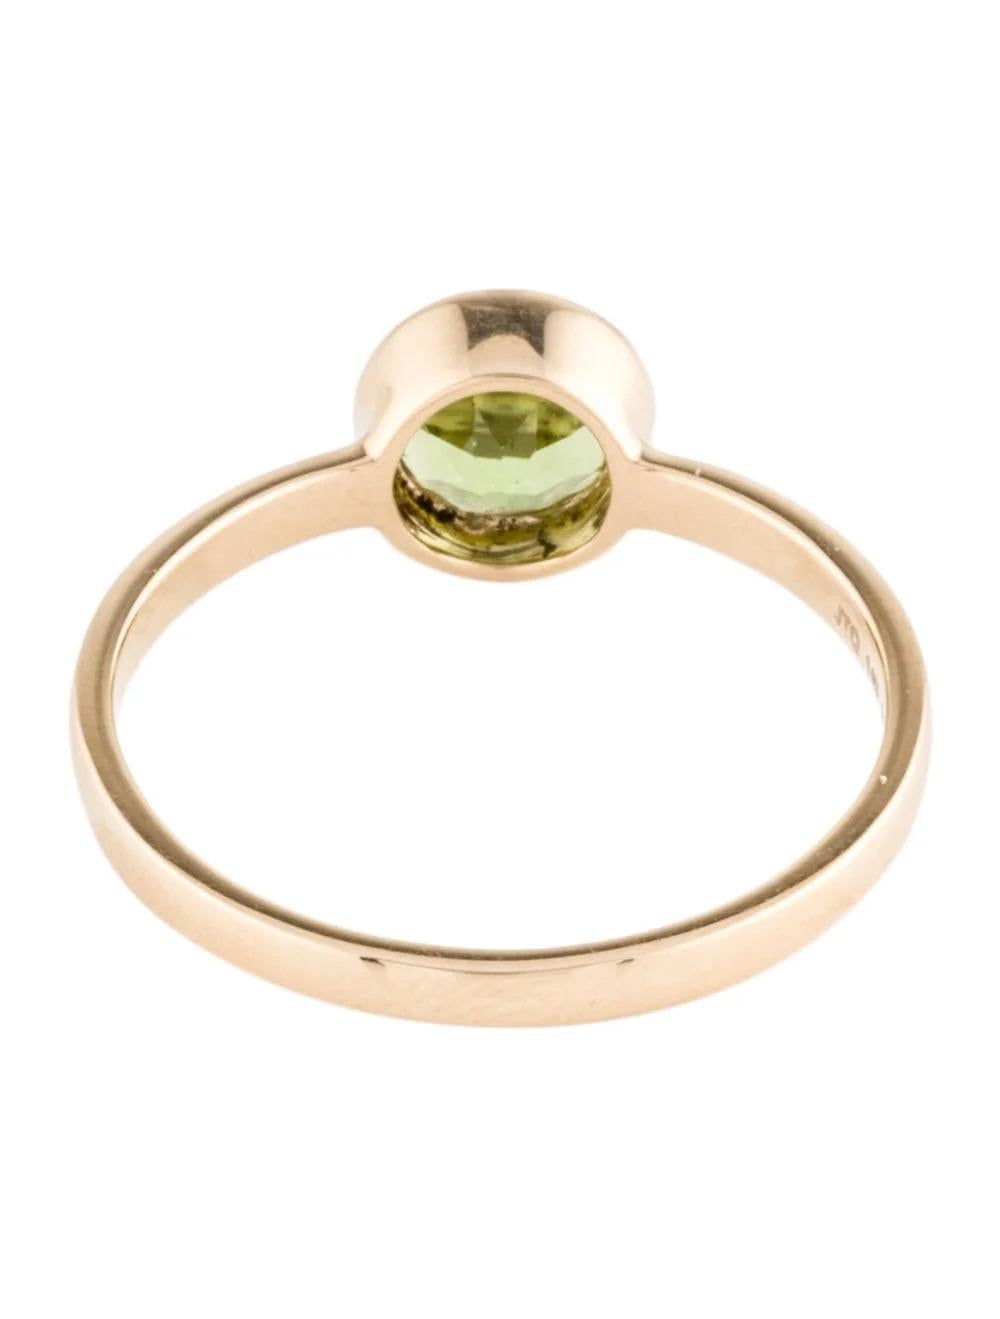 14K Peridot Solitaire Cocktail Ring Size 7, Green Gemstone Vintage, Fine Jewelry In New Condition For Sale In Holtsville, NY